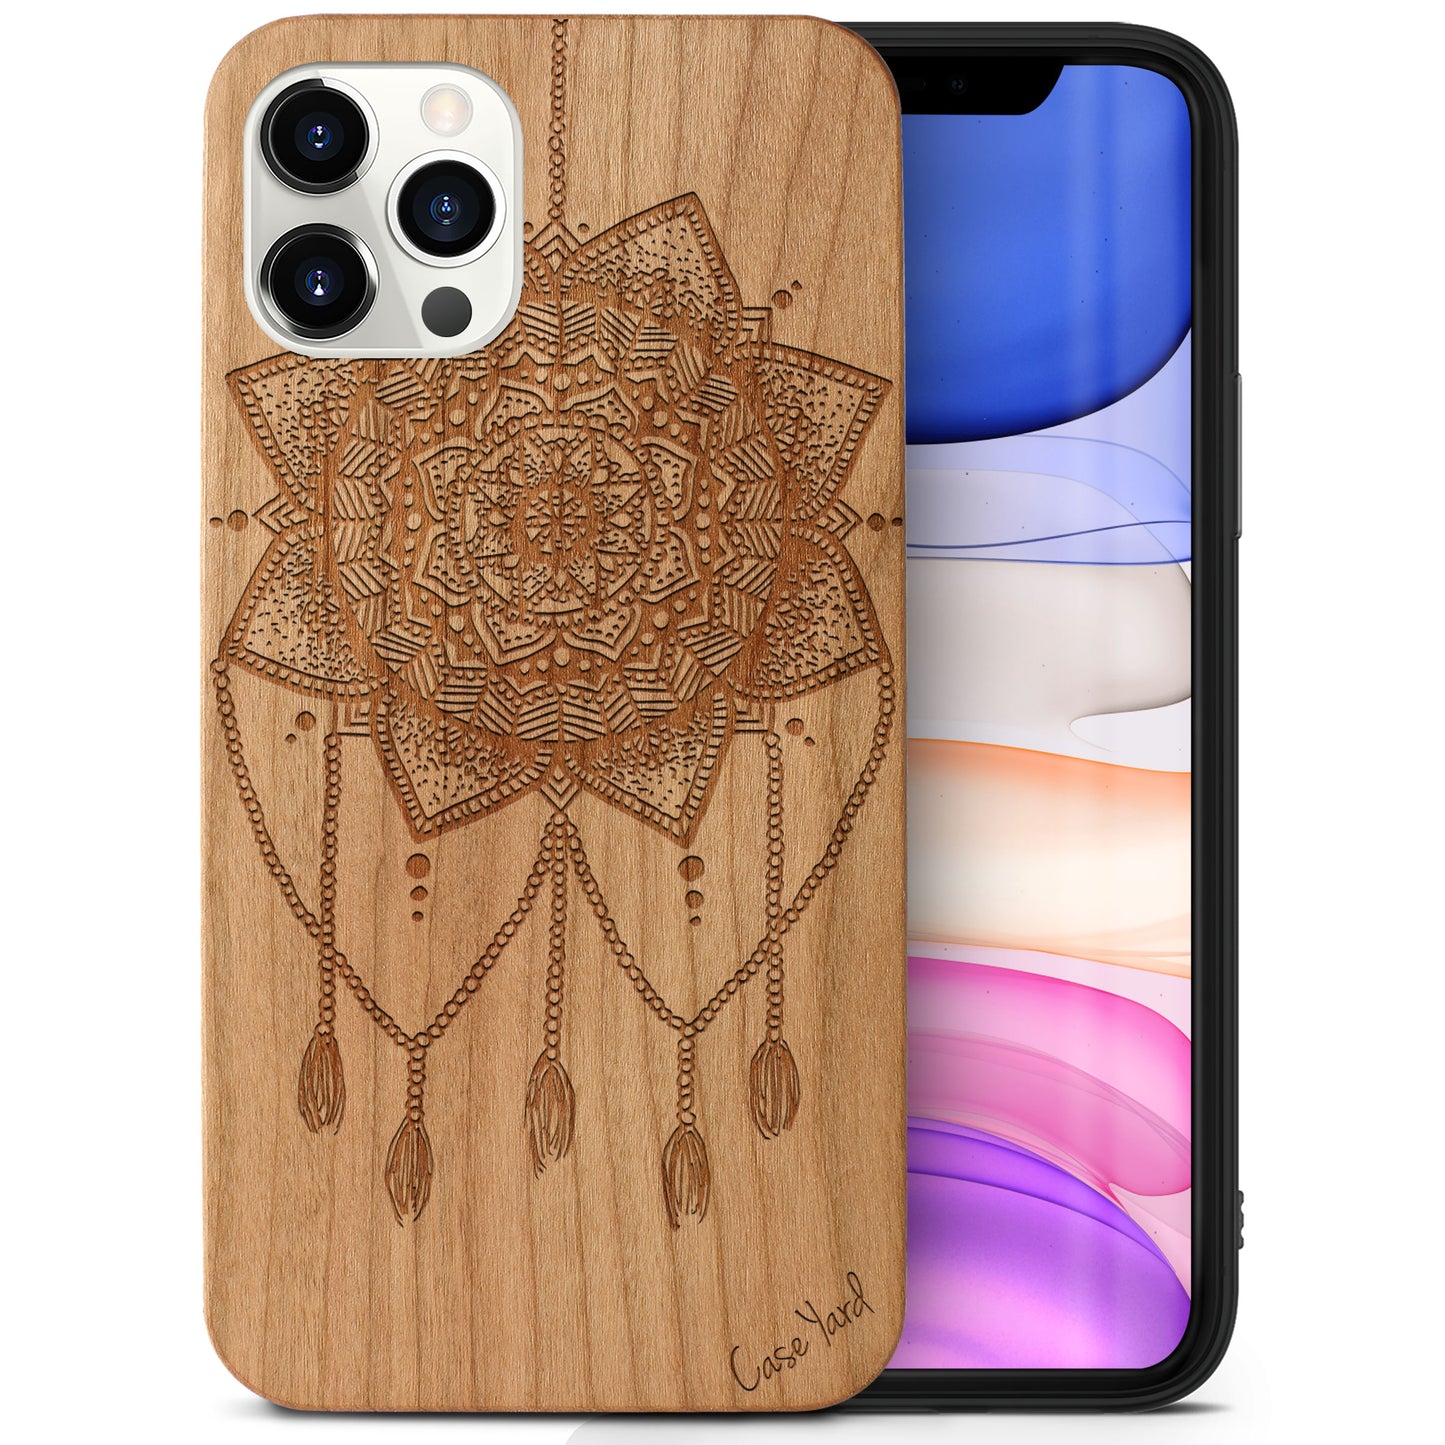 Wooden Cell Phone Case Cover, Laser Engraved case for iPhone & Samsung phone Small Dream Catcher Design